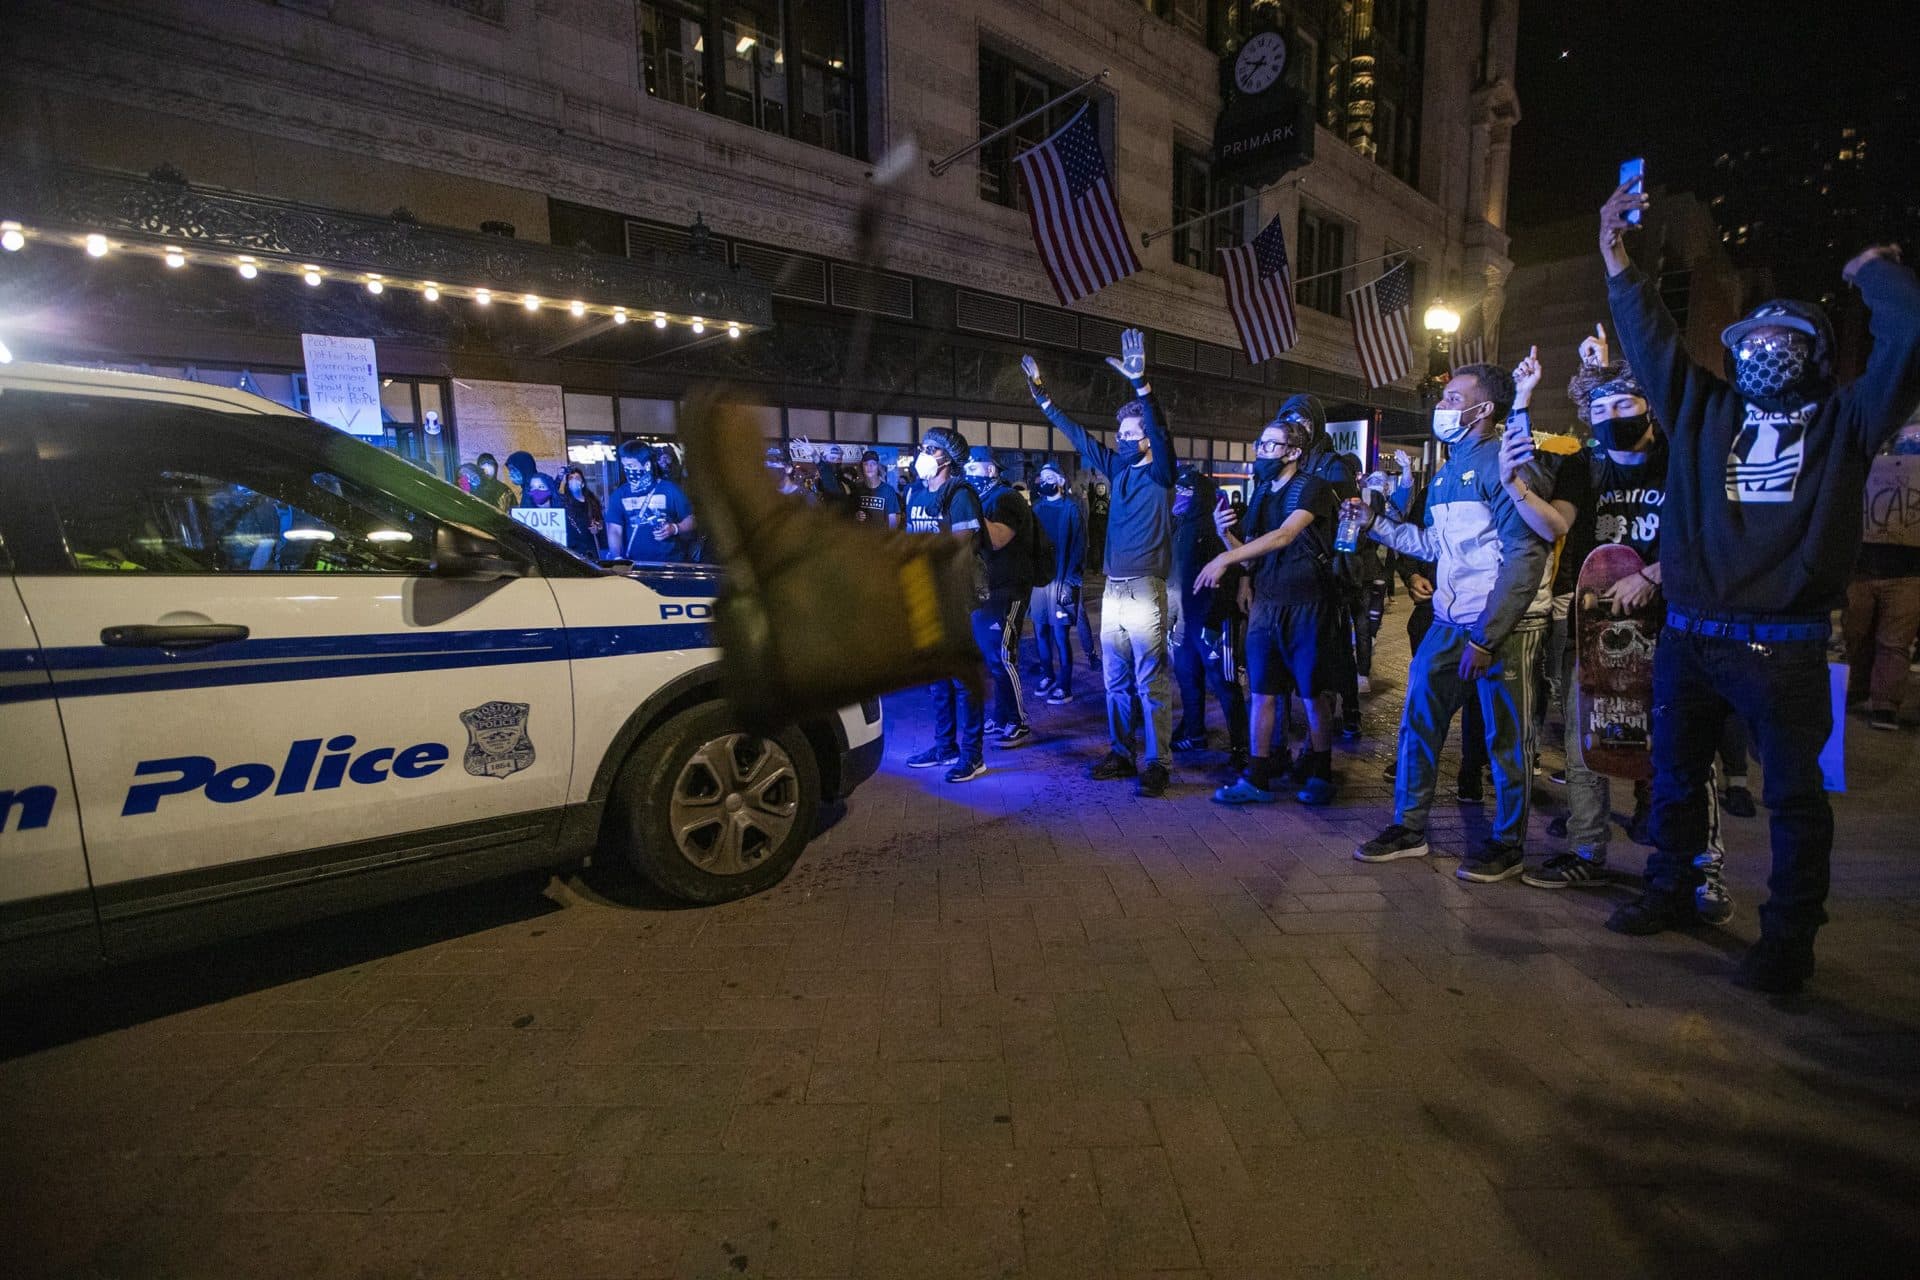 A boot is thrown at a Boston Police vehicle as people confront officers on Washington Street in Downtown Crossing. (Jesse Costa/WBUR)